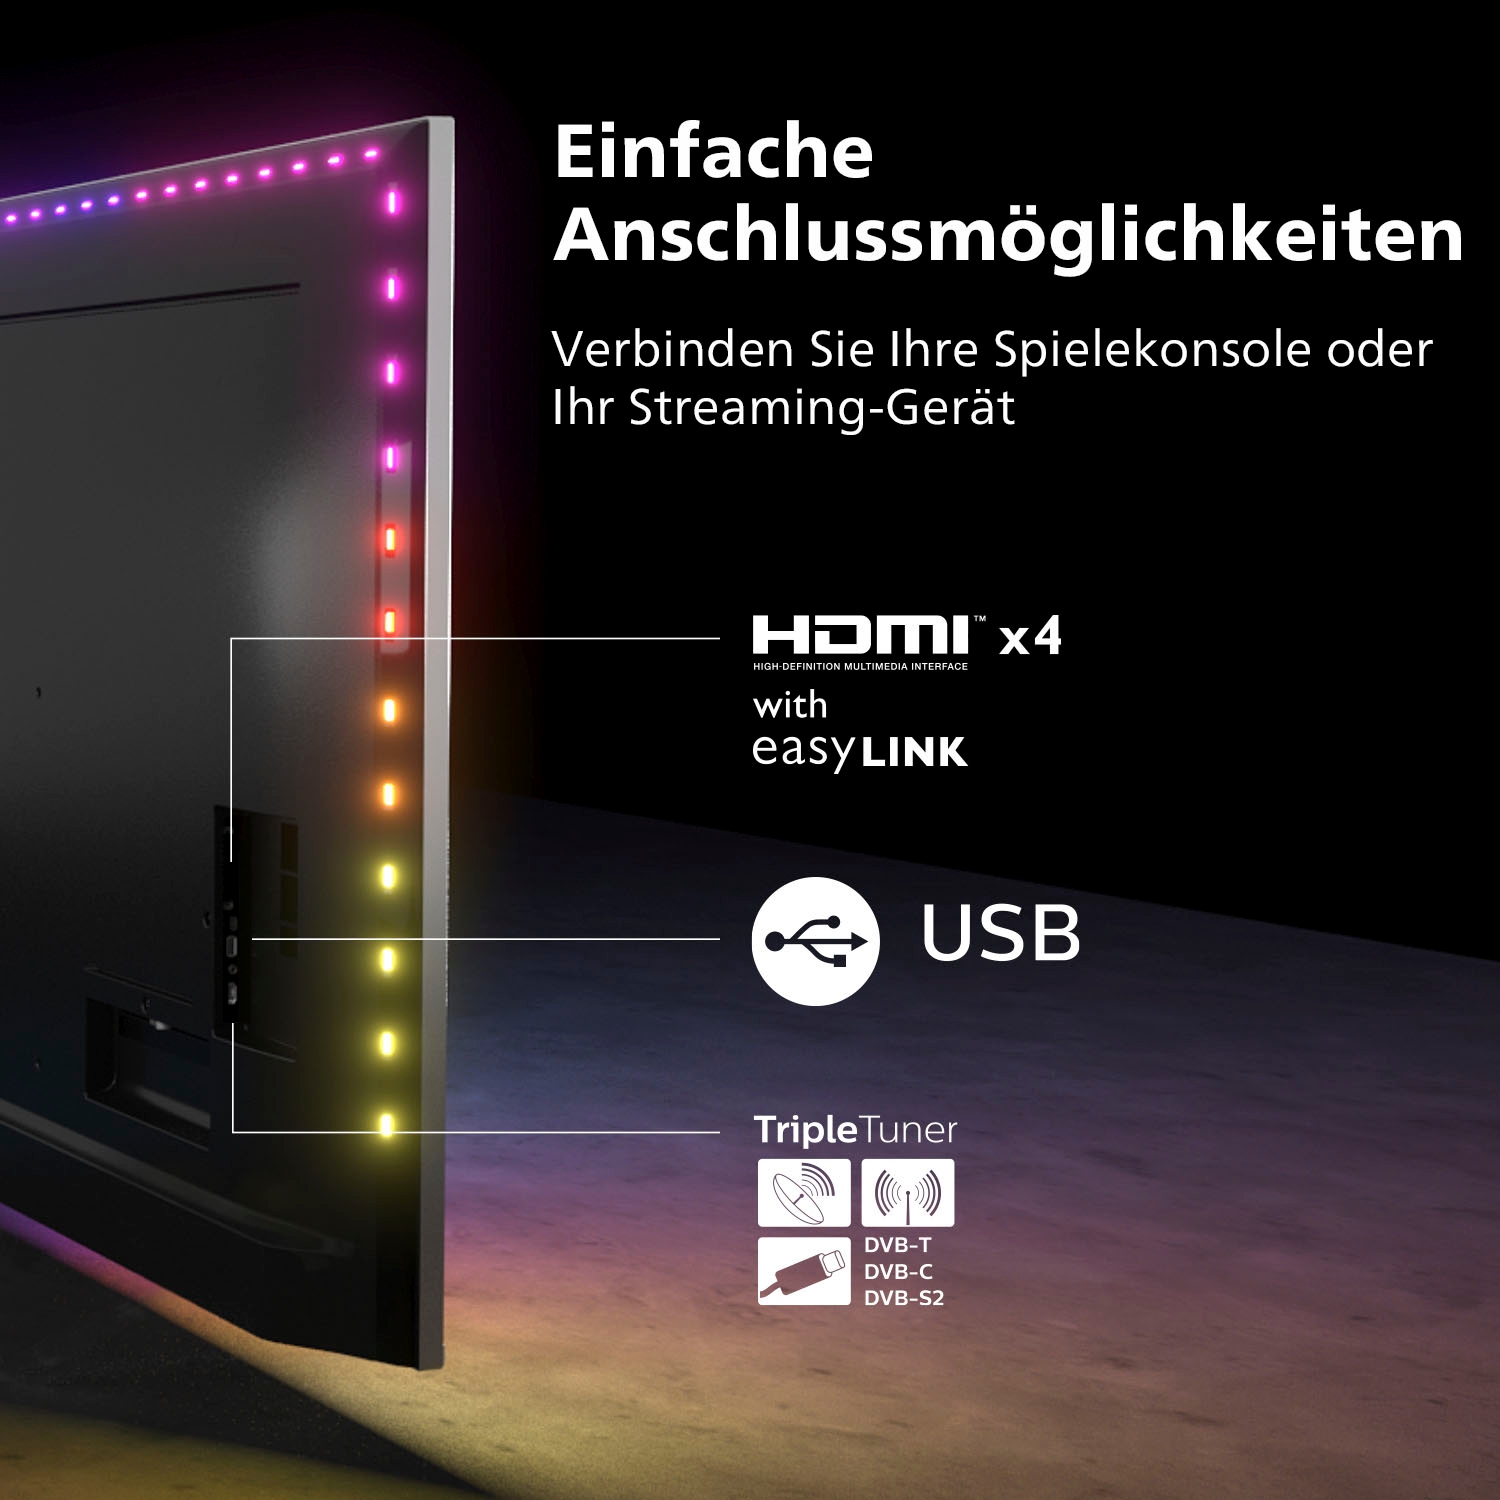 TV 4K Philips HD, 217 Ultra TV-Smart-TV-Google bei OTTO »86PUS8807/12«, Android kaufen Zoll, cm/86 LED-Fernseher